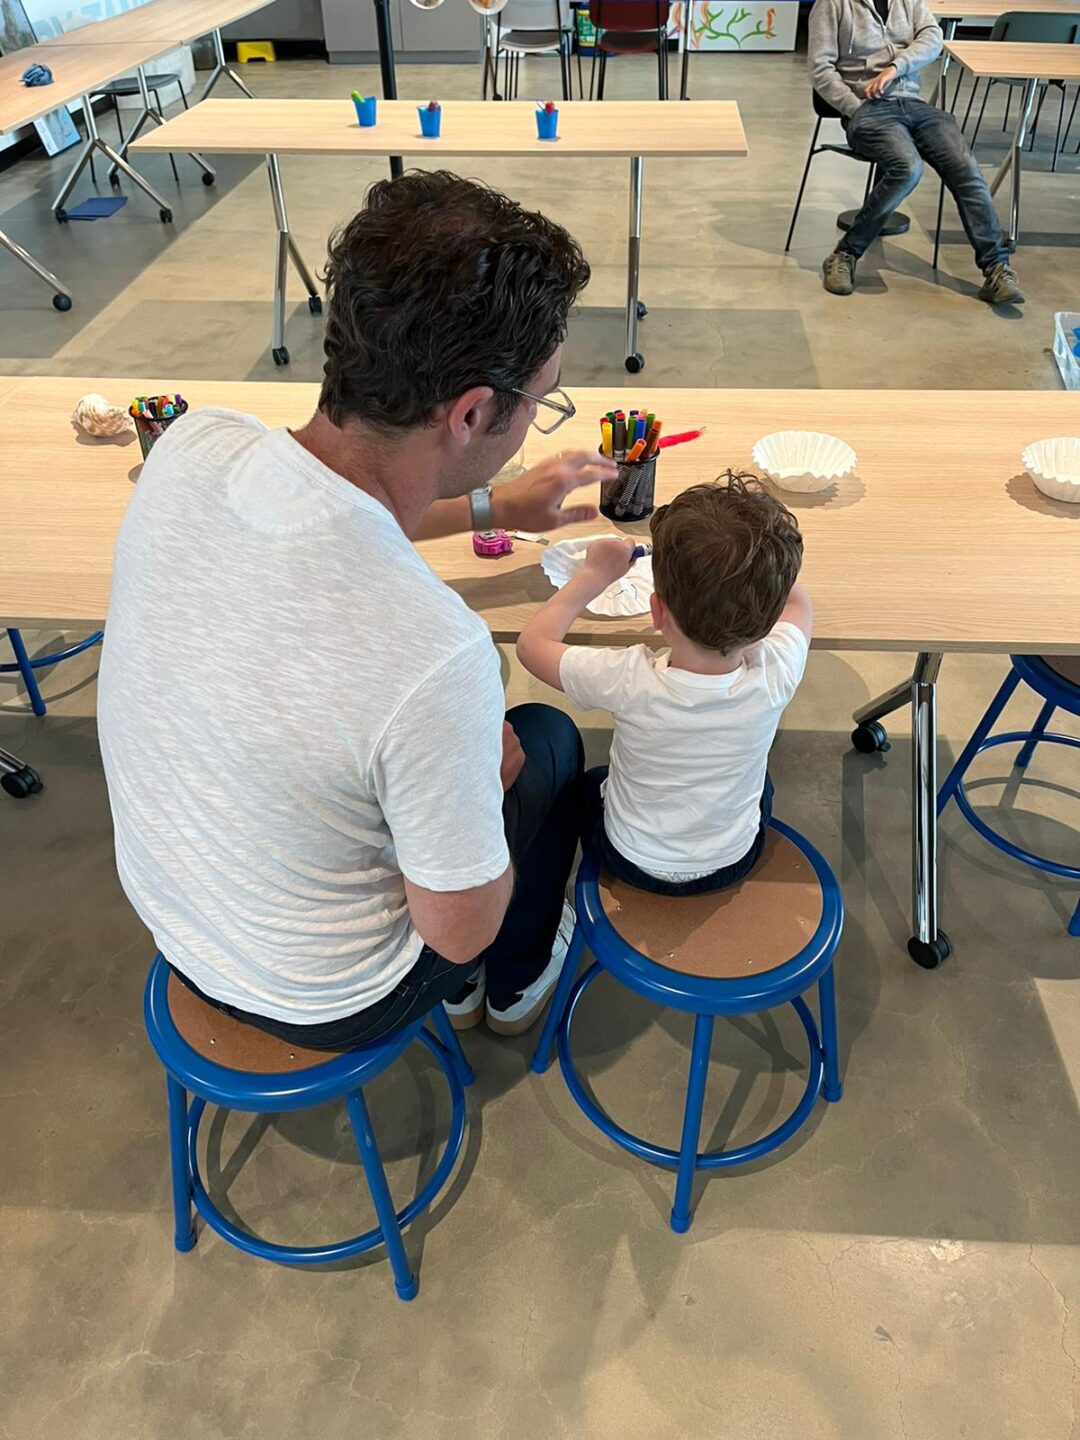 A parent and a child working on an an arts and crafts project at a table